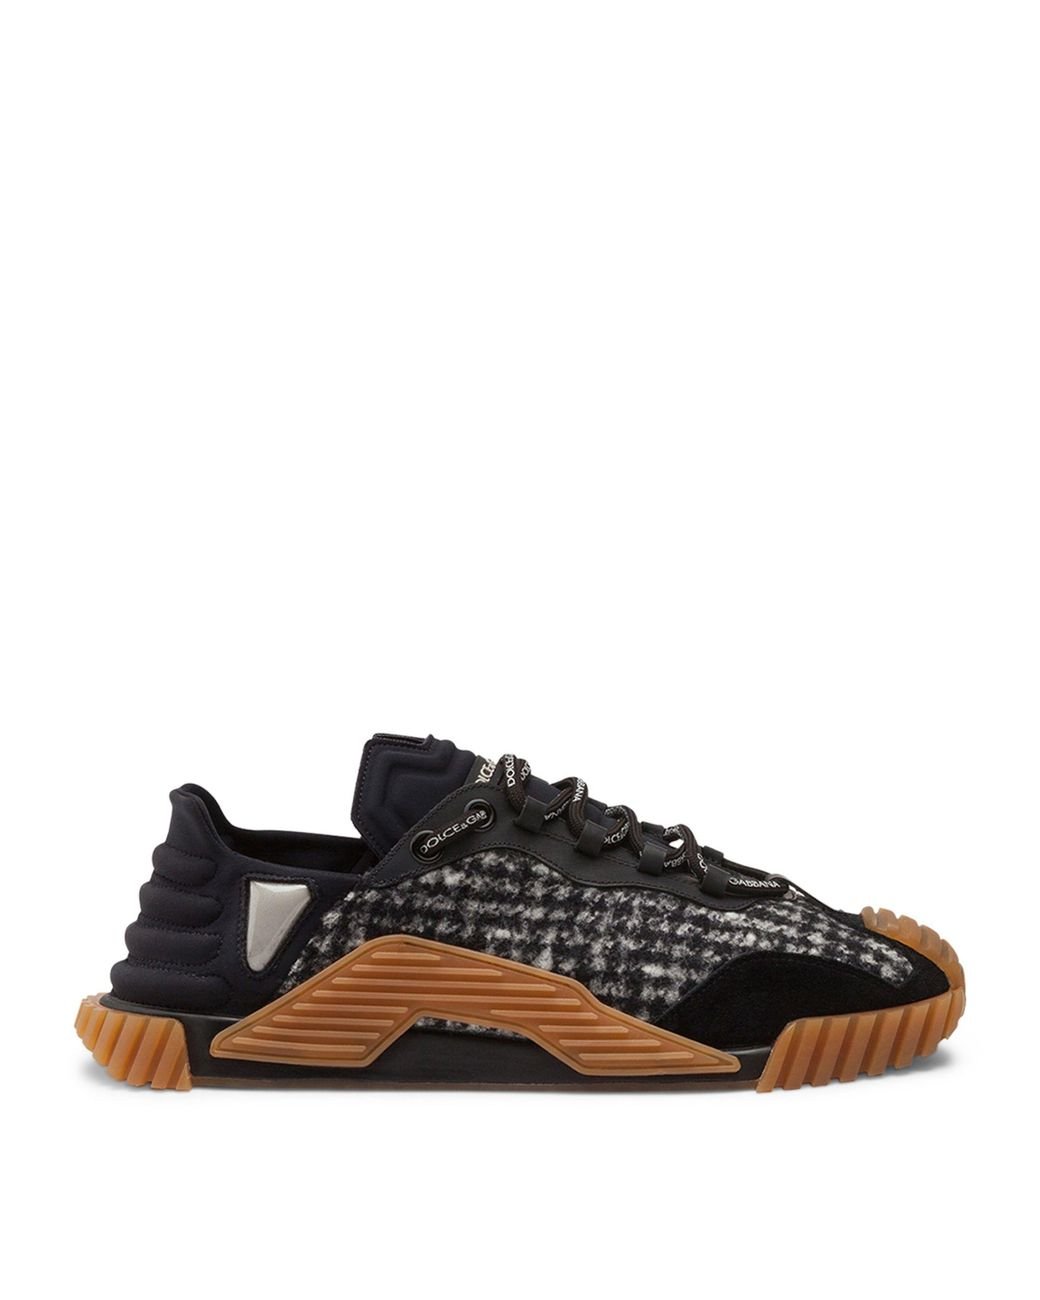 Dolce & Gabbana Leather Ns1 Sneakers in Black for Men - Lyst